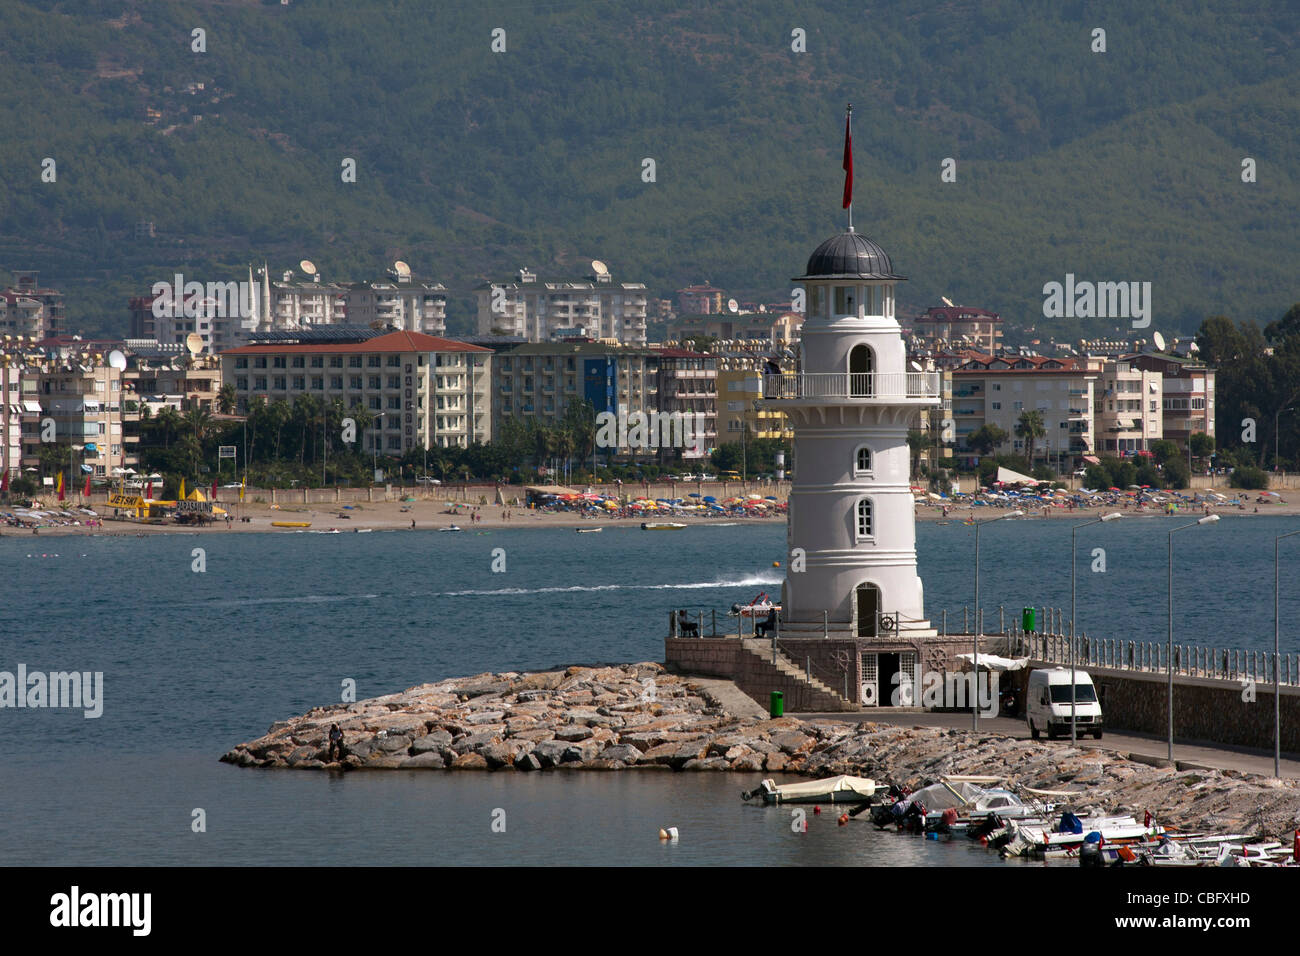 The lighthouse in Alanya harbour, Turkey Stock Photo